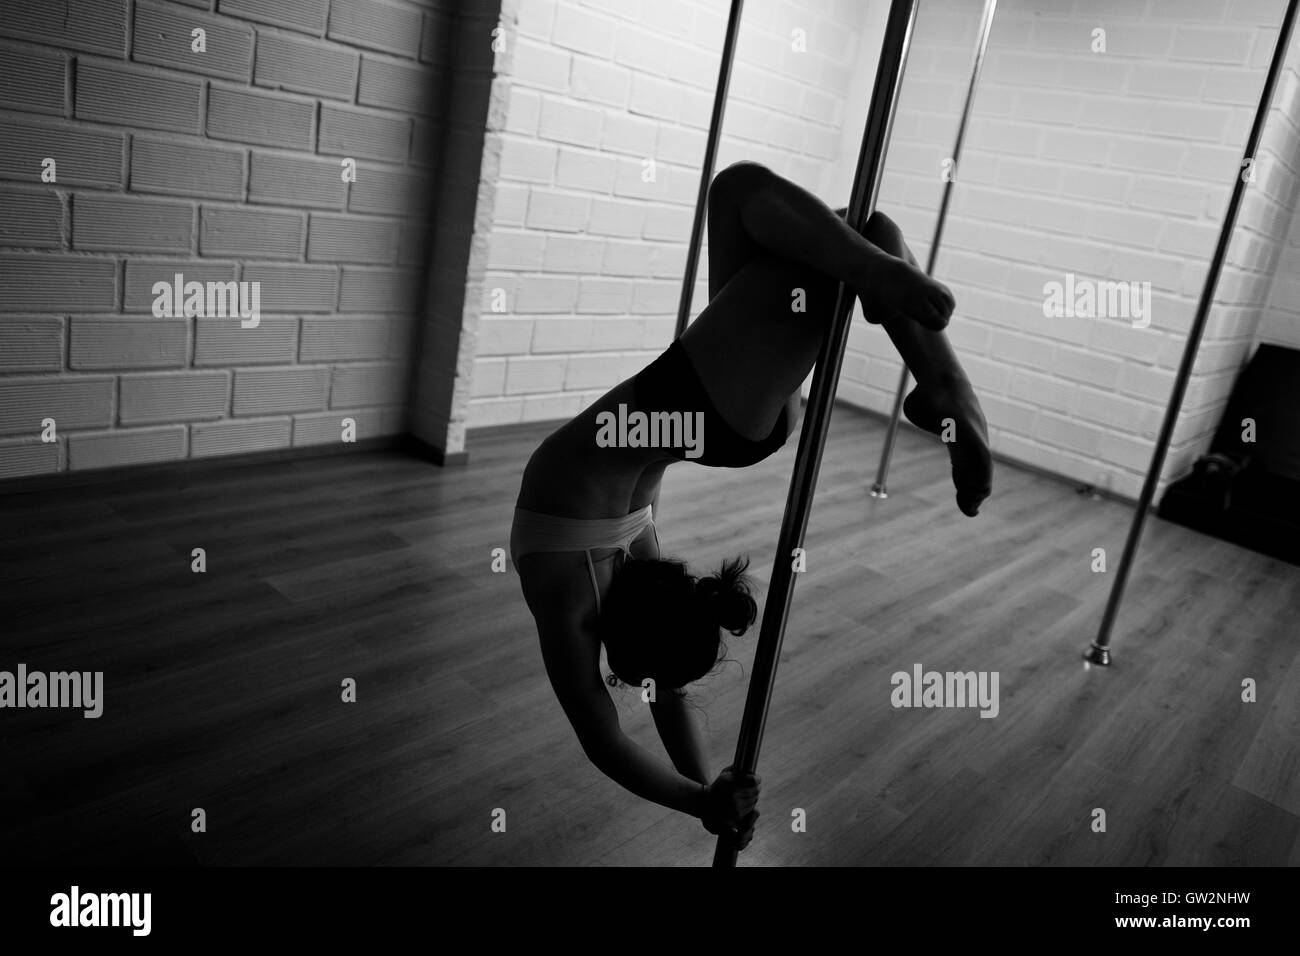 Valeria Aboultaif, a young Colombian pole dancer, shows off her flexibility  during a pole dance training session at Academia Pin Up, a dance studio in  Medellín, Colombia Stock Photo - Alamy